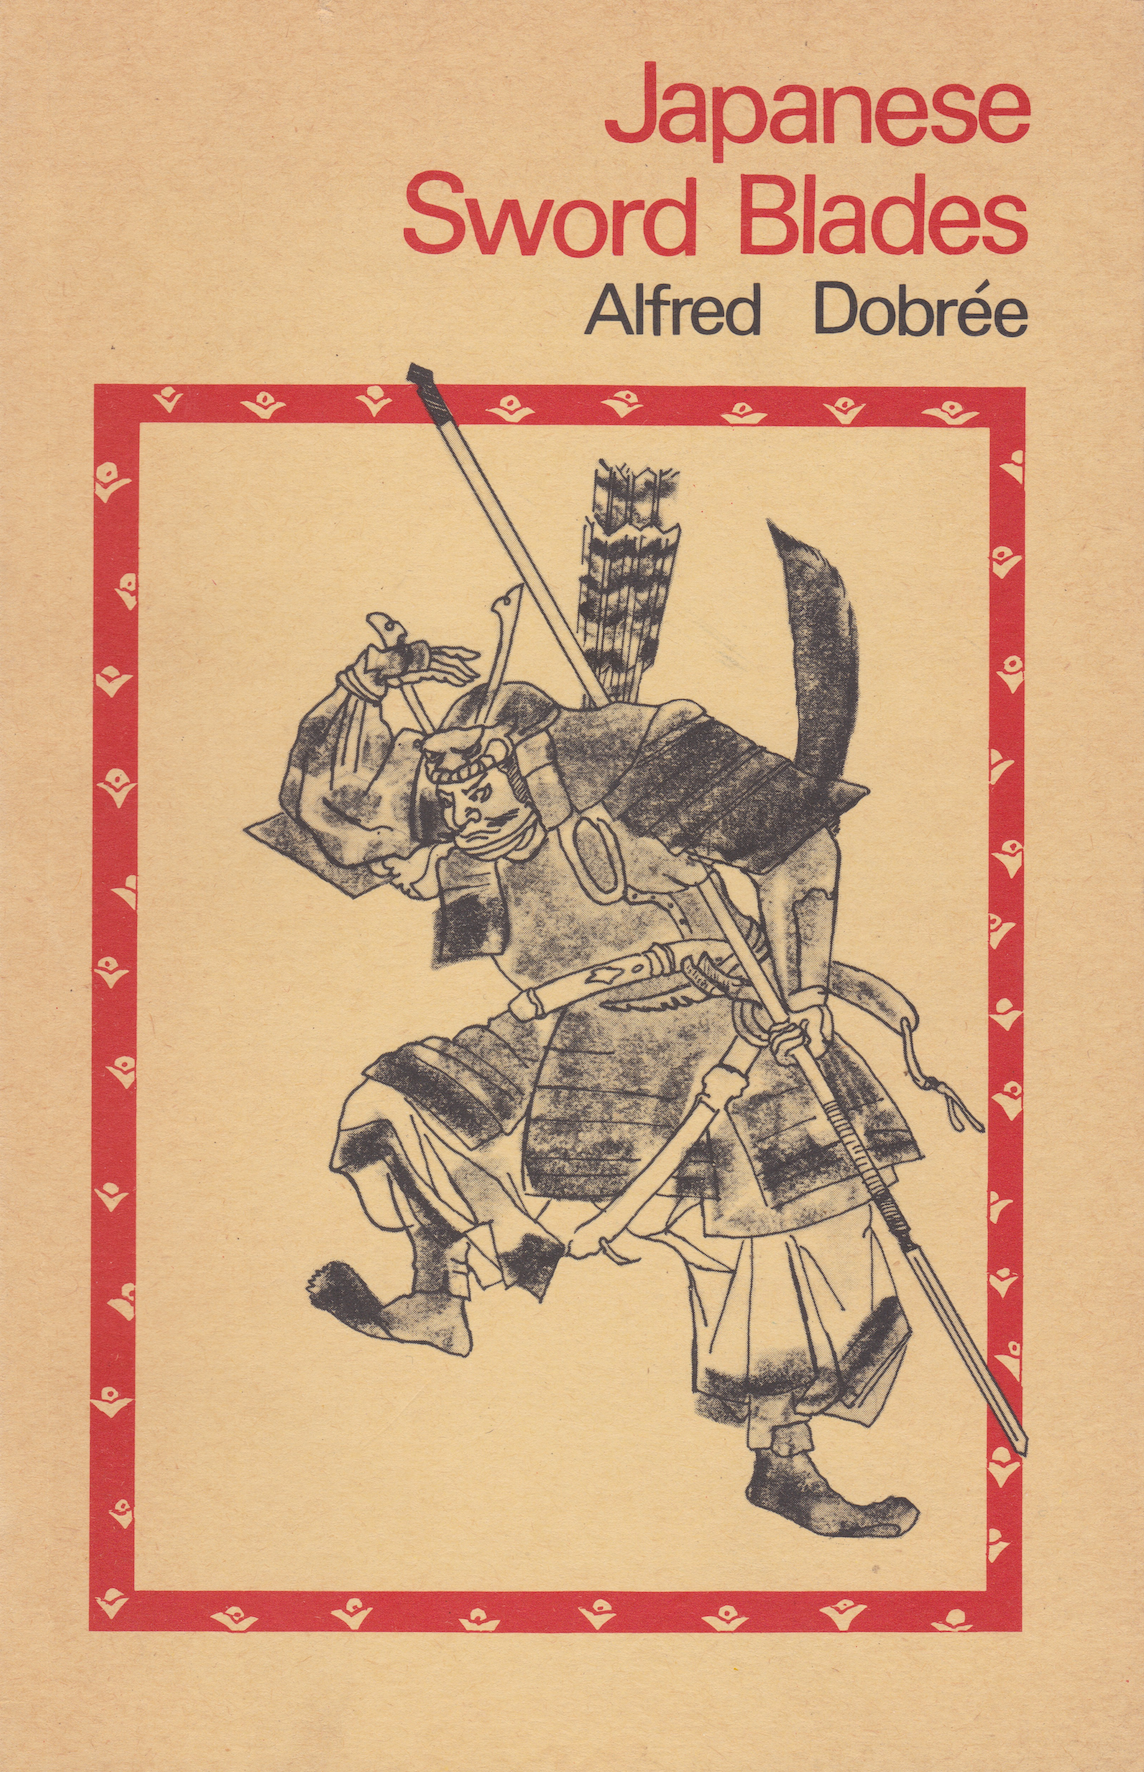 Japanese Sword Blades Book by Alfred Dobree (Preowned) - Budovideos Inc